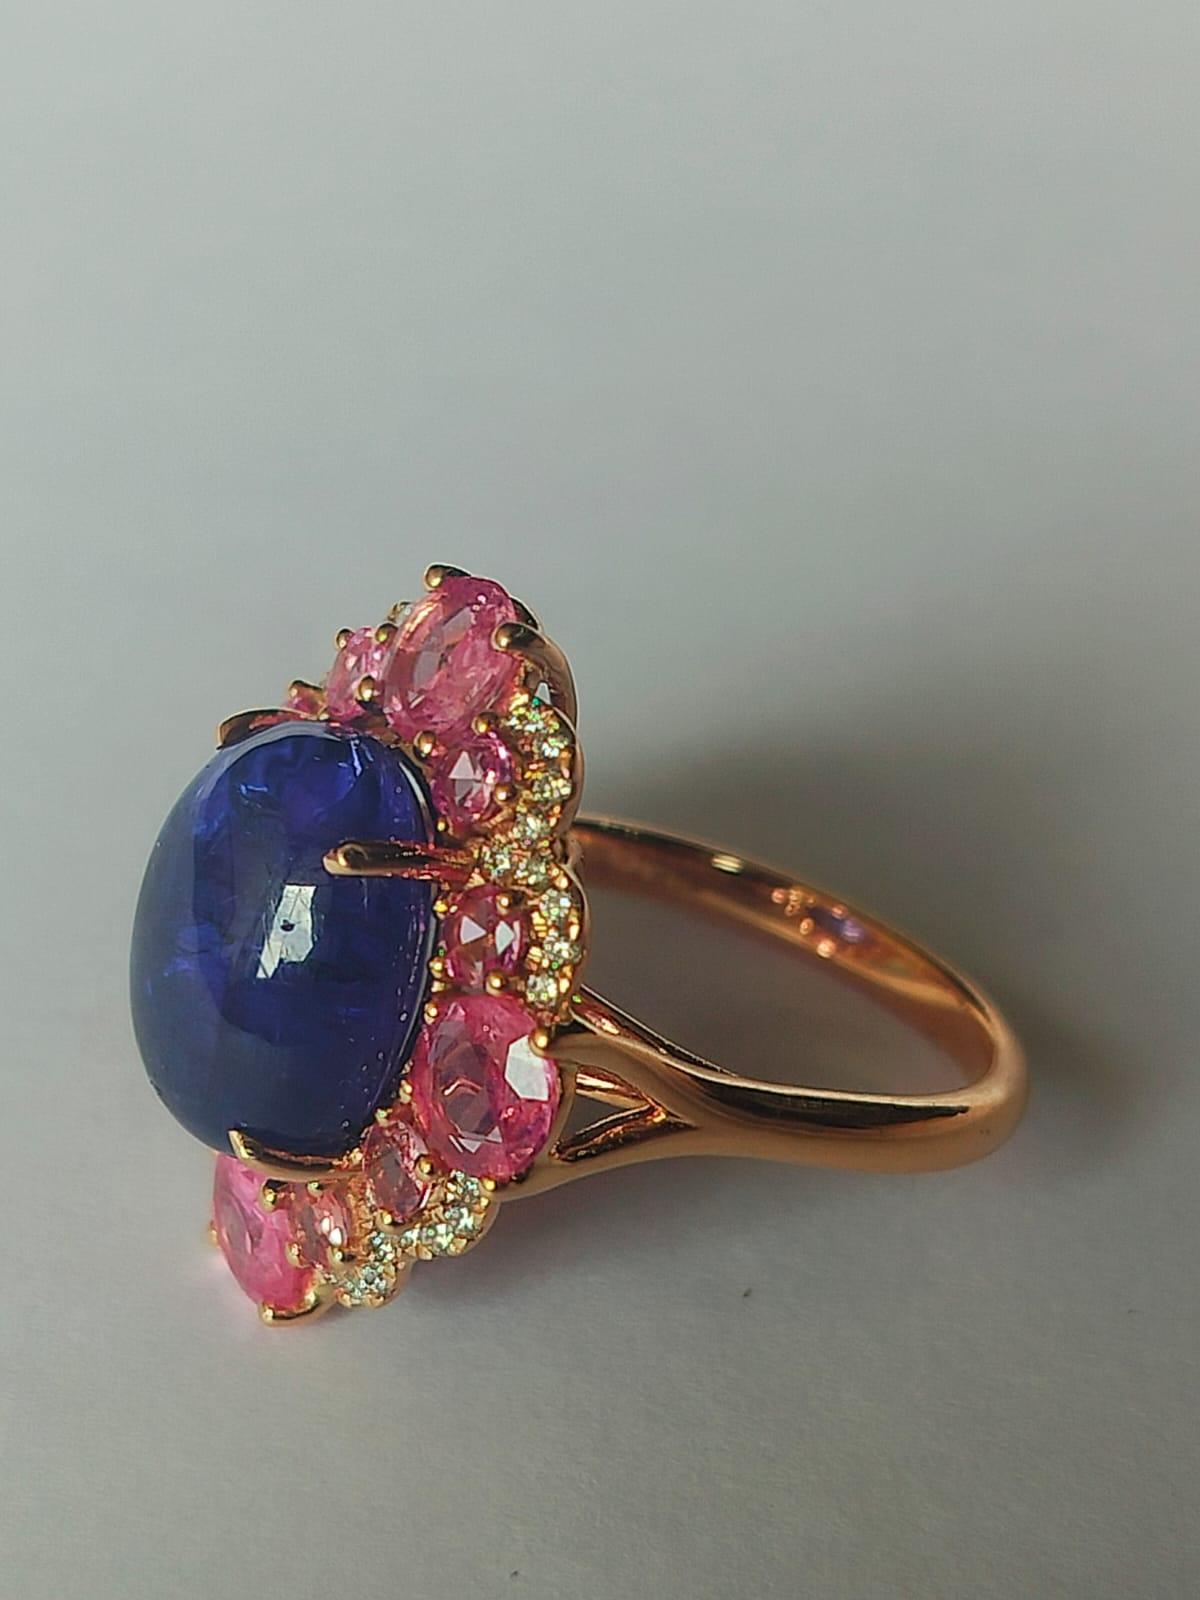 A very gorgeous and one of a kind, Tanzanite Pink Sapphire Cocktail Ring set in 18K Gold & Diamonds. The weight of the Tanzanite cabochon is  9.00 carats. The Tanzanite is responsibly sourced from Tanzania. The weight of the Pink Sapphire is 2.36